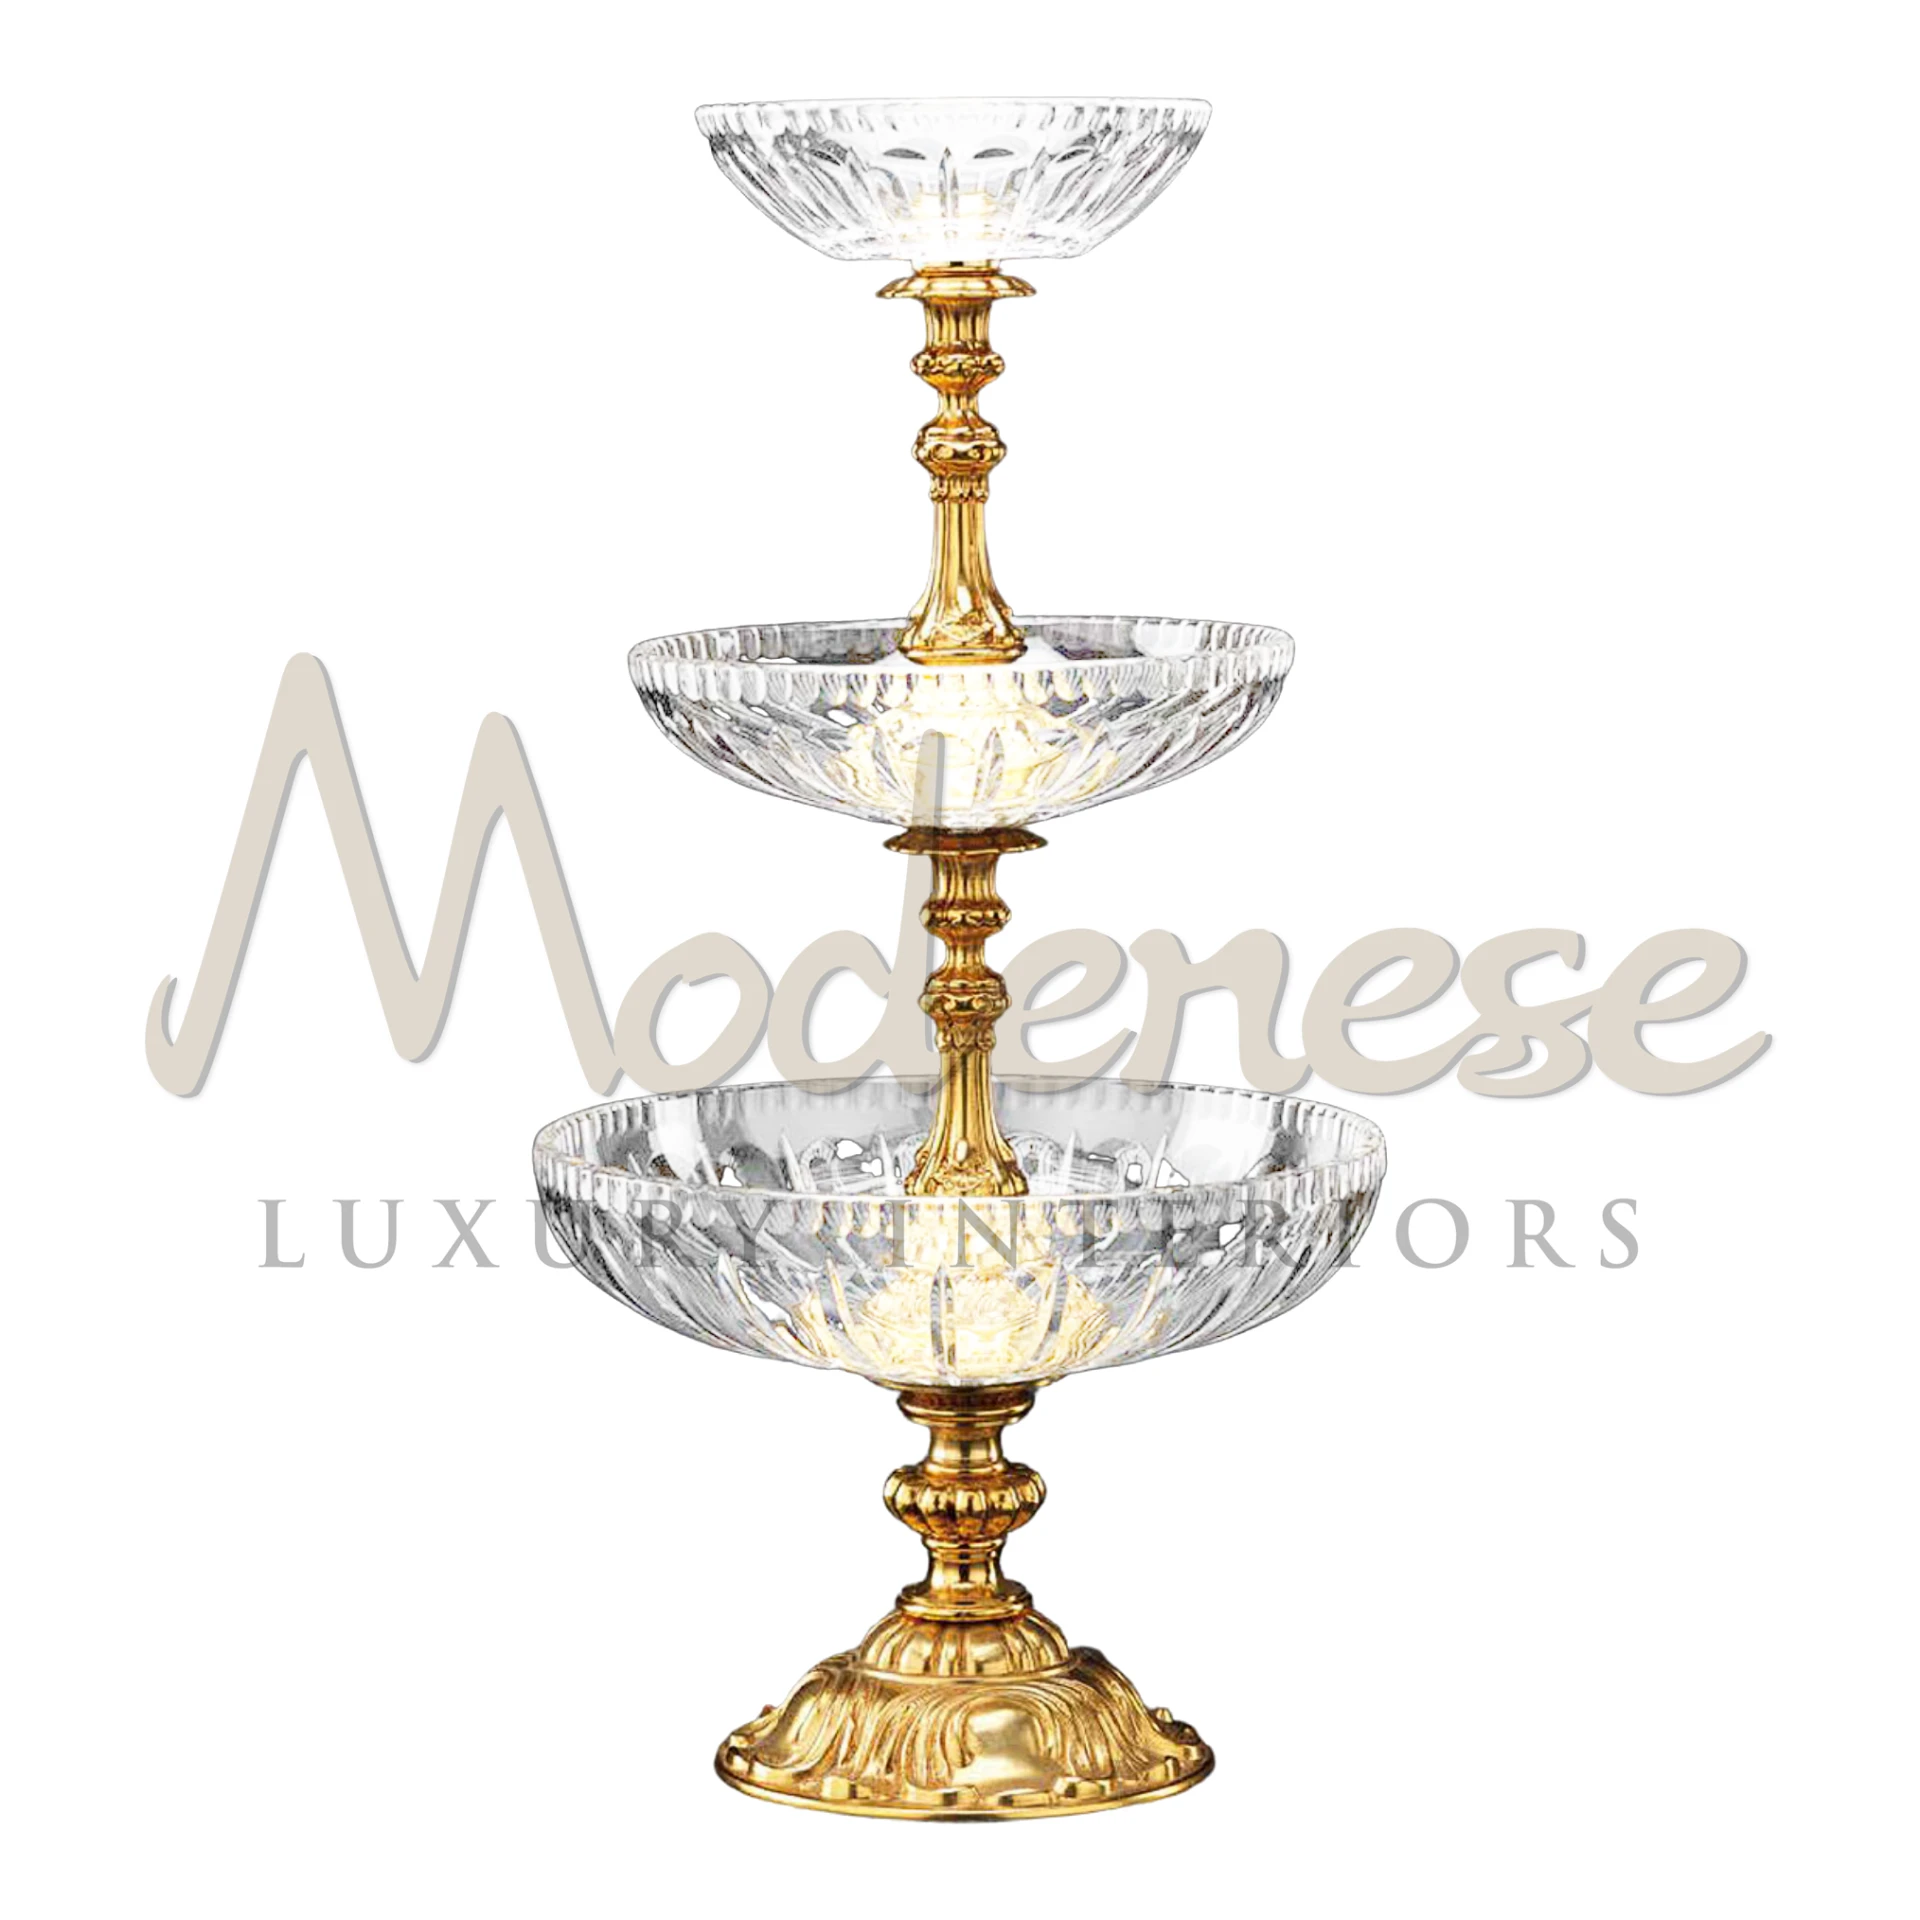 Traditional Three Deck Bowl with intricate designs in crystal, glass, or porcelain, ideal for luxury interior design, exuding classic and baroque elegance.